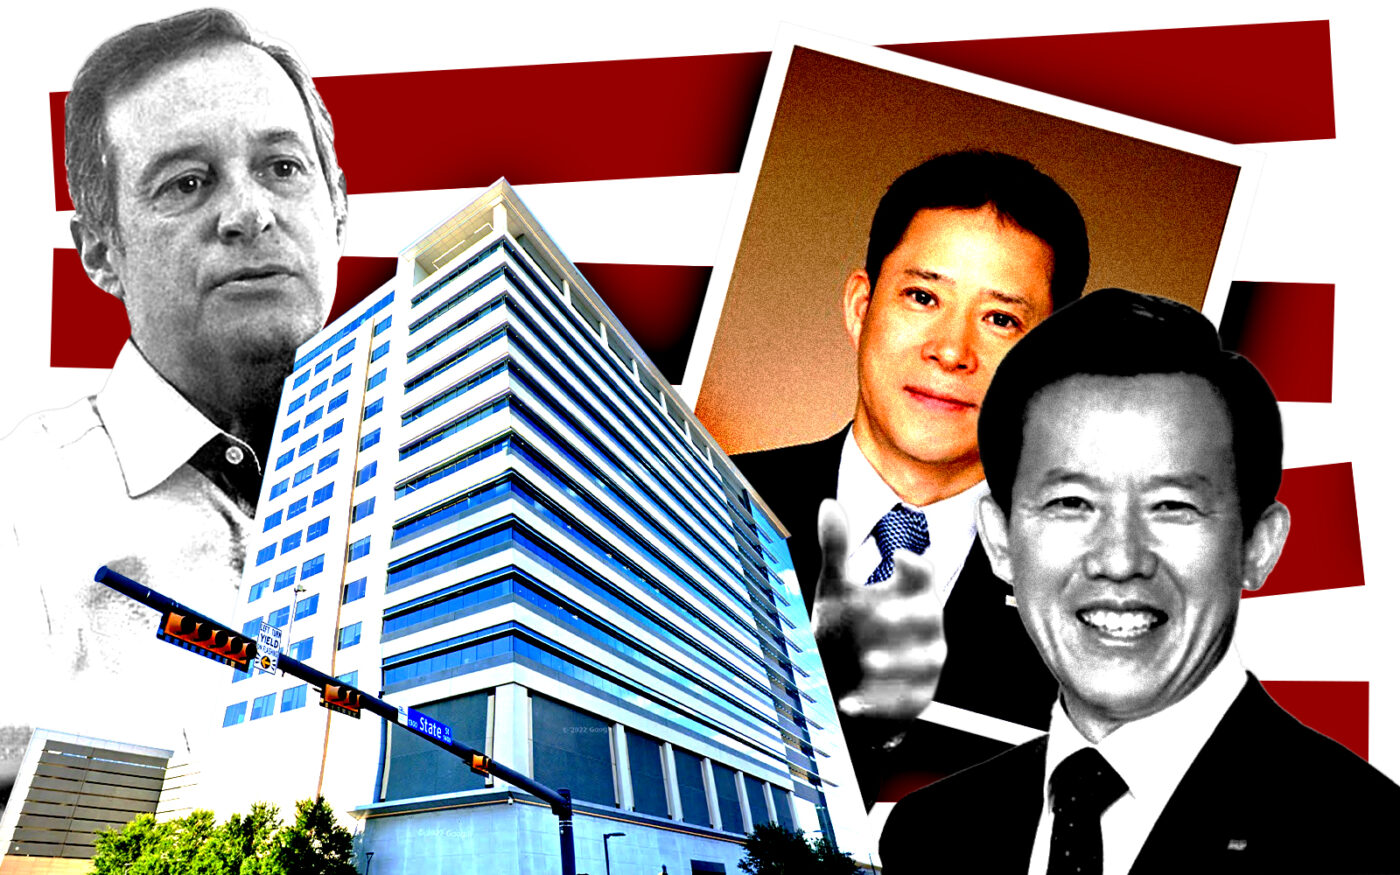 From left: Transwestern Investment Group's Charles Hazen, Mirae Asset Securities' Man Yeol Lee and Hyun Man Choi, and 1415 State Street in Richardson (Transwestern Investment Group, Mirae Asset Securities, Google Maps)